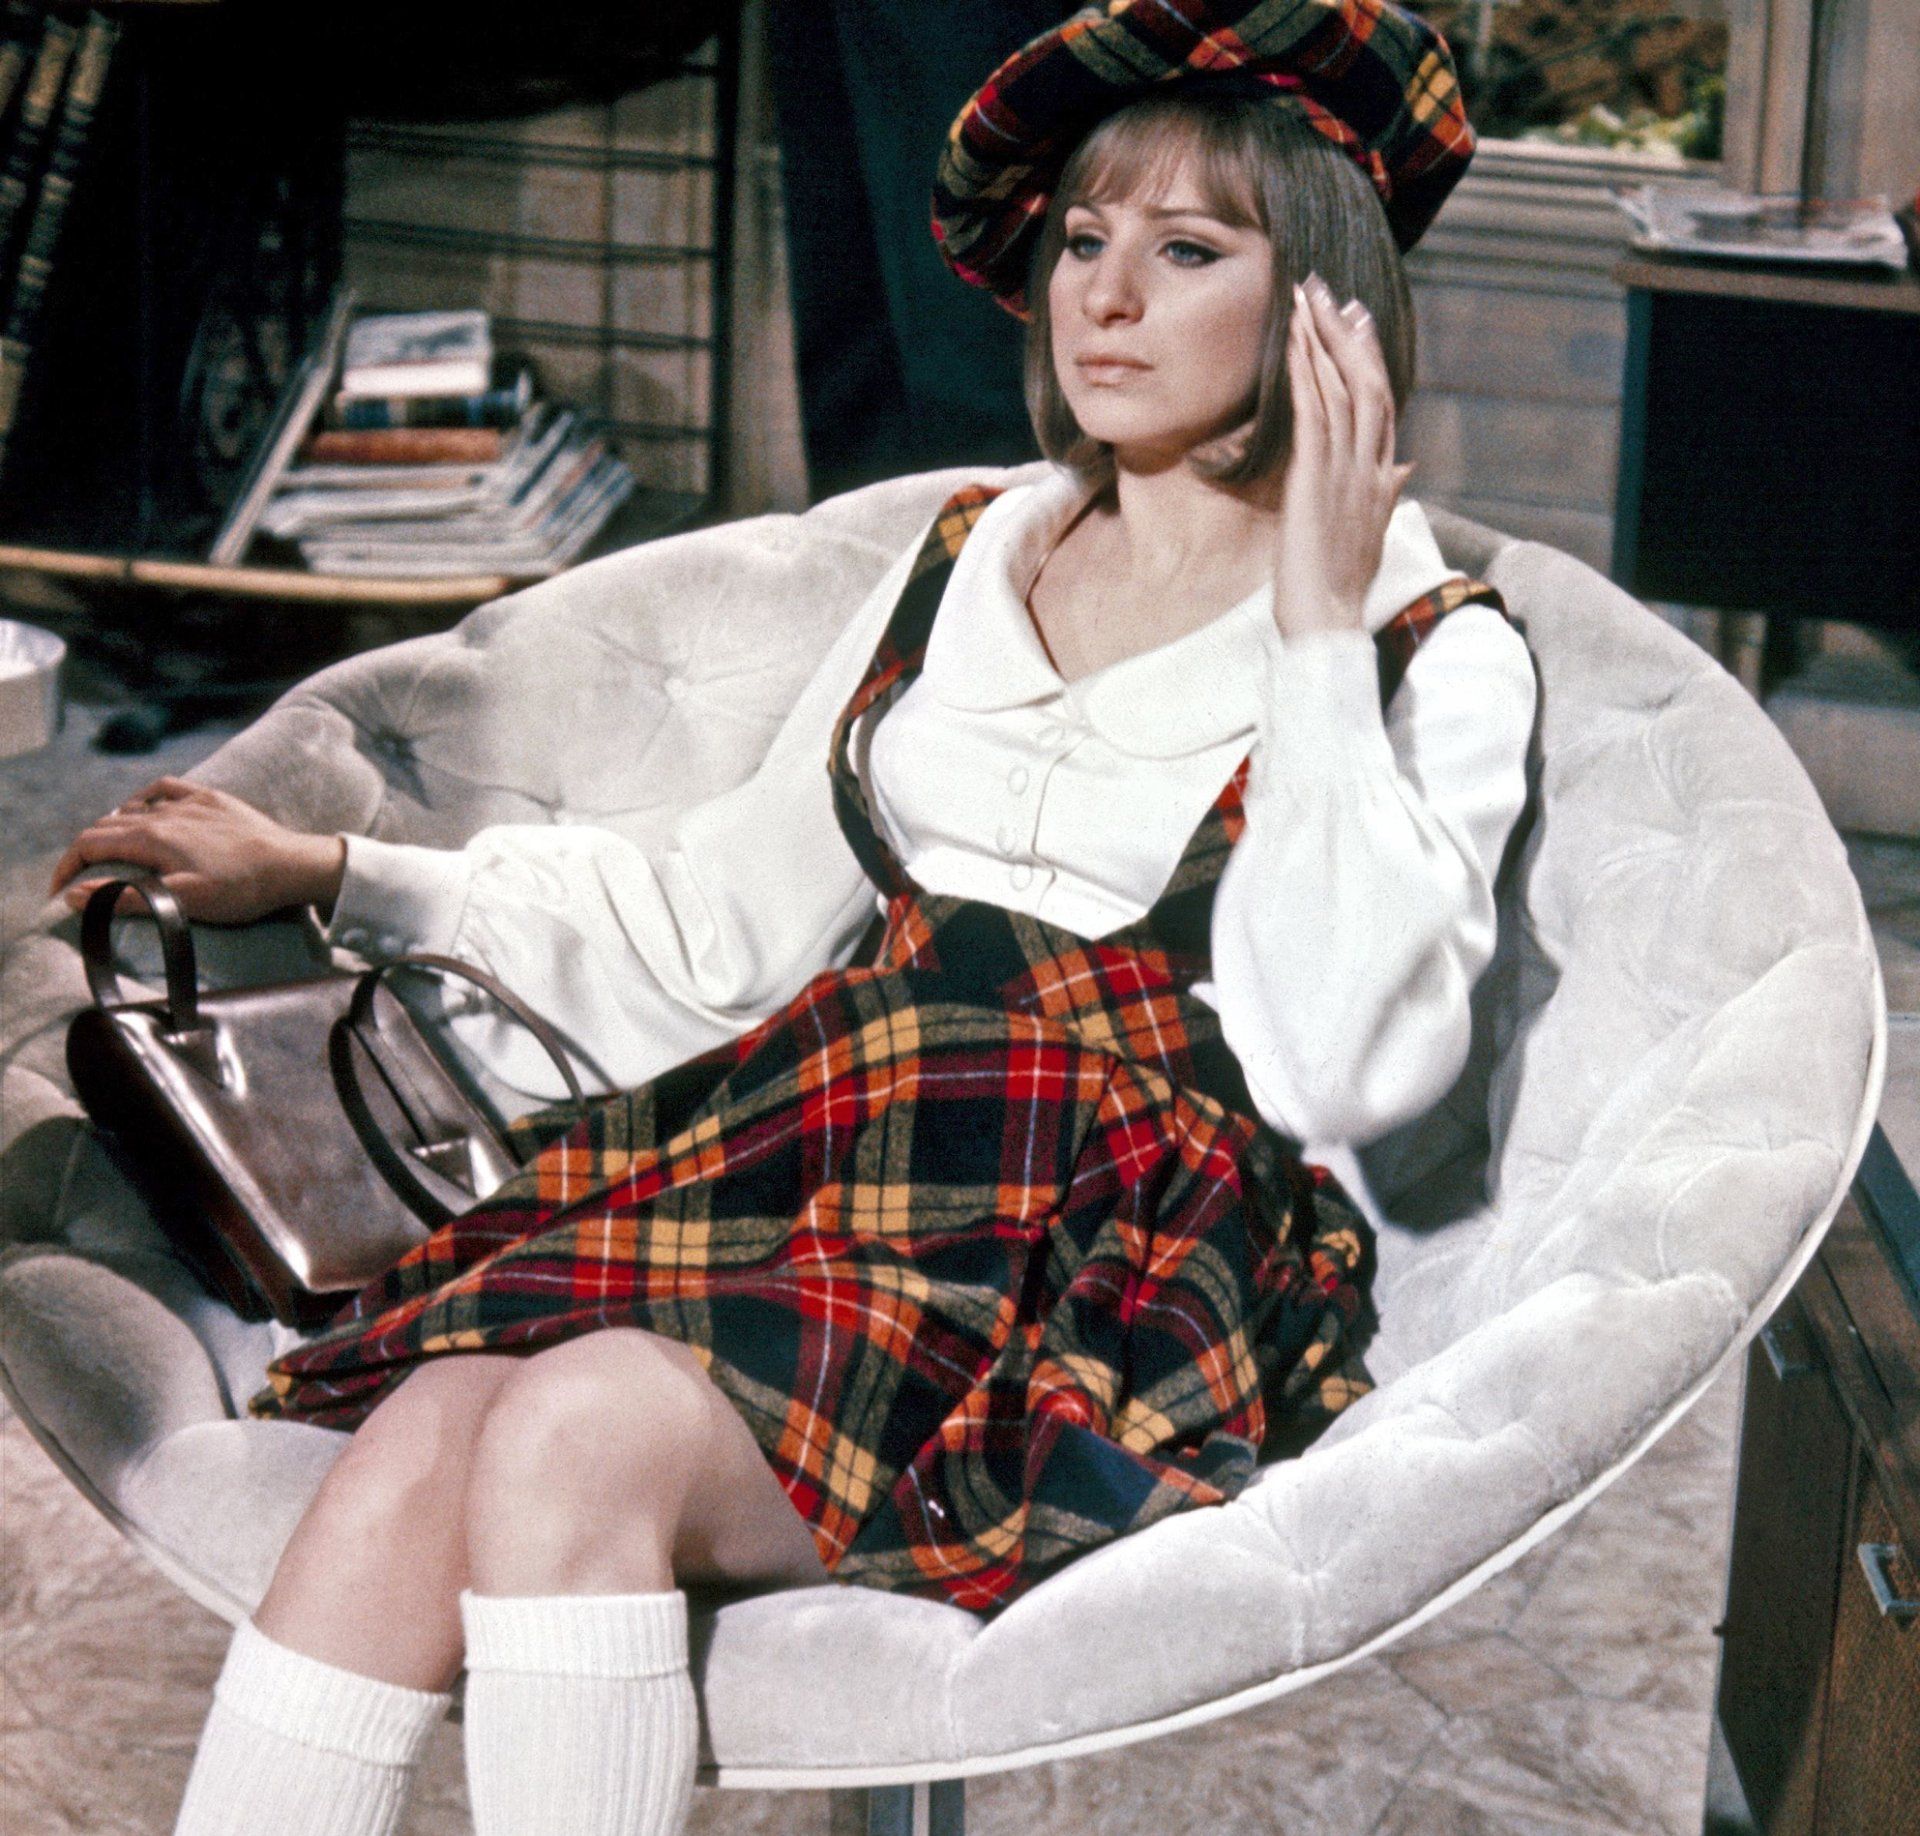 Scaasi designed plaid jumper for Streisand as Daisy Gamble.